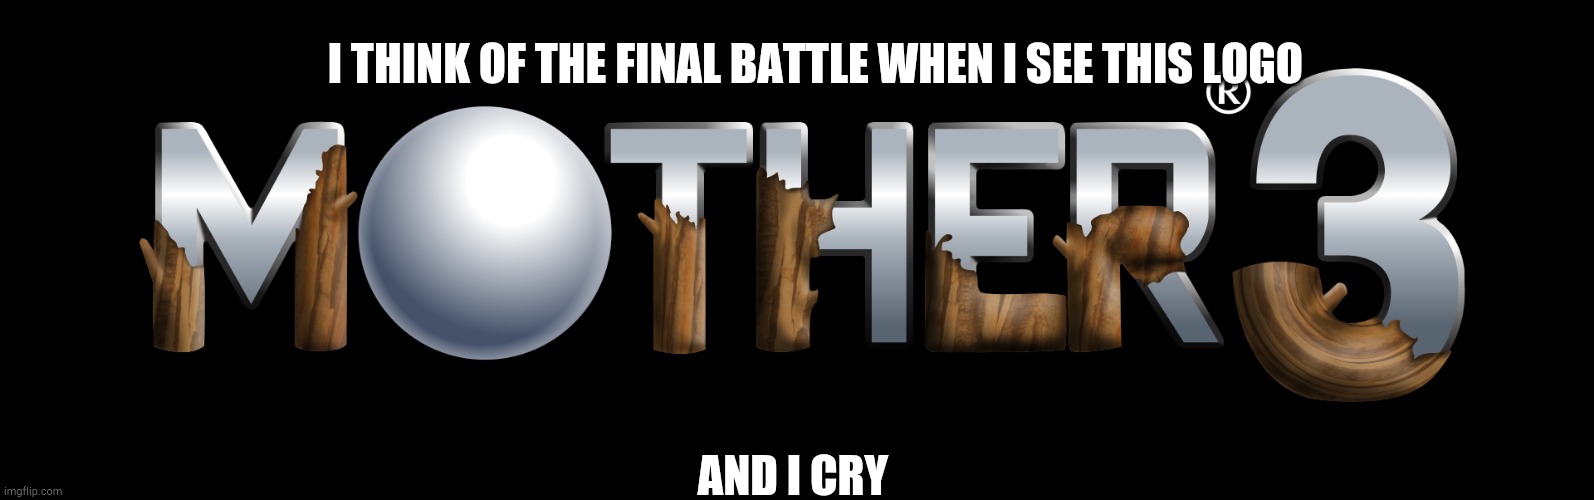 I THINK OF THE FINAL BATTLE WHEN I SEE THIS LOGO AND I CRY | made w/ Imgflip meme maker